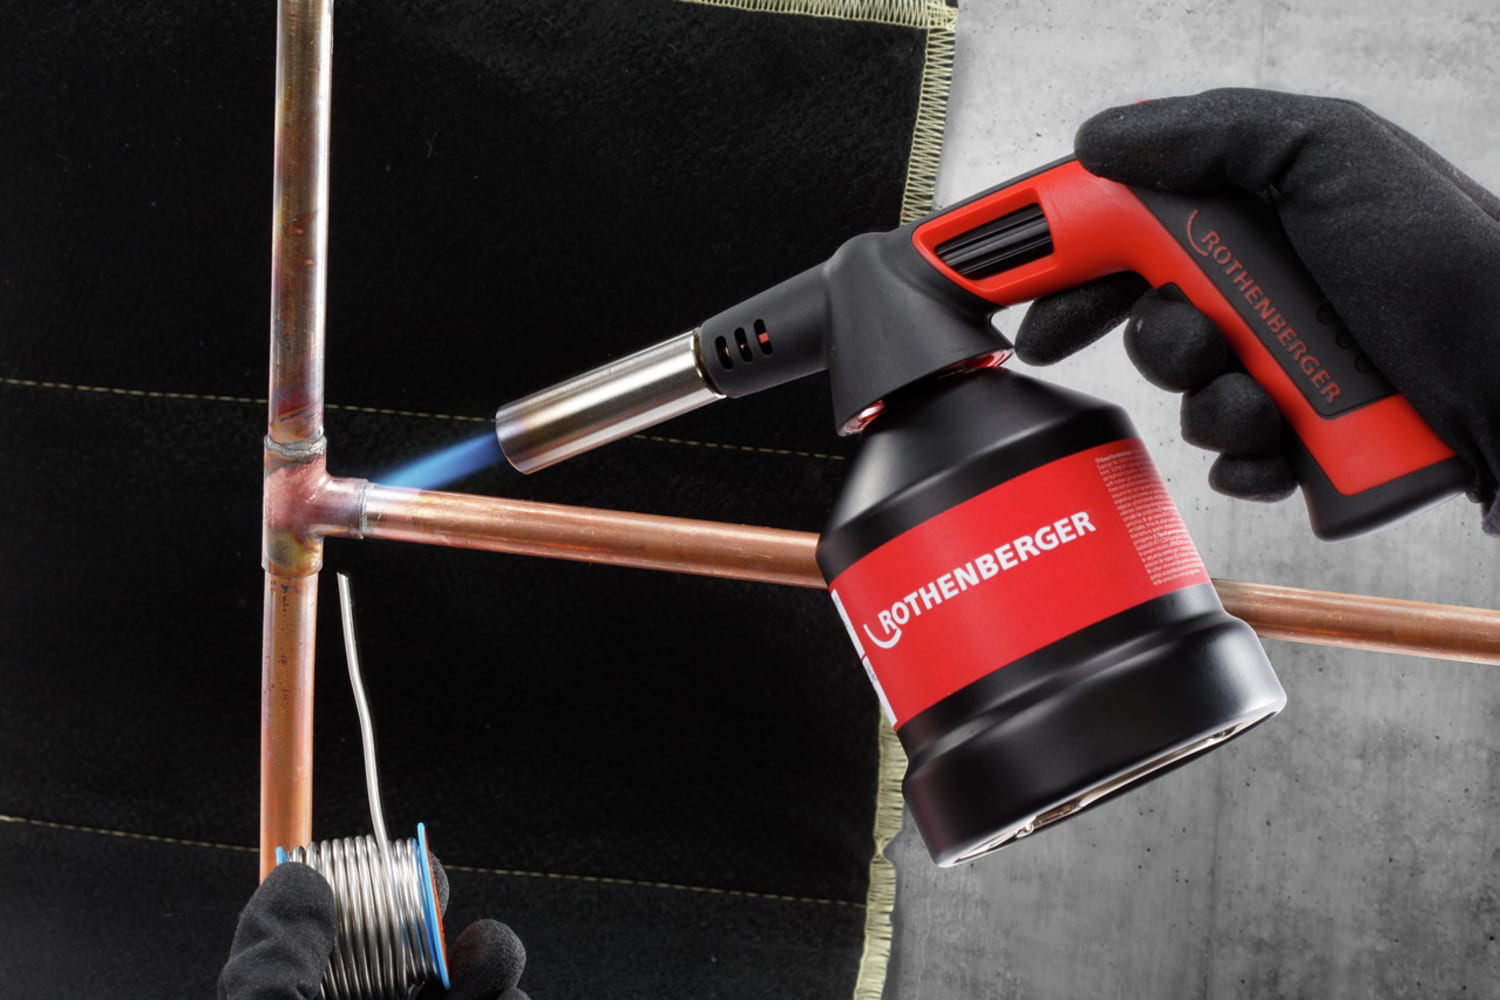 The Rothenberger 1000002358 Roflame 4 Piezo Soft Soldering Torch heating a pipe.